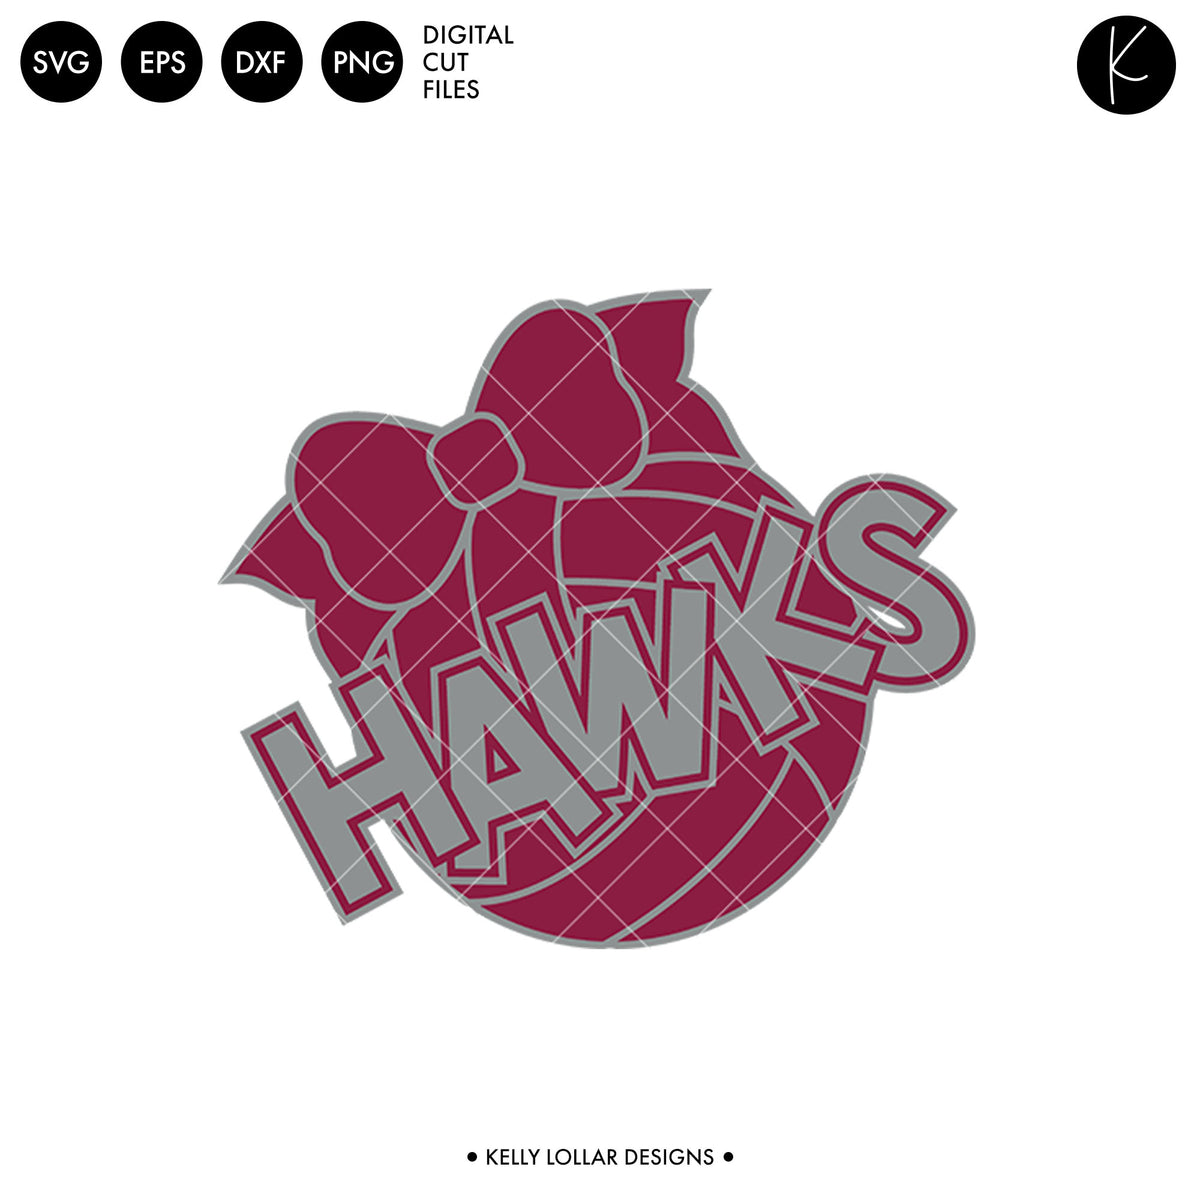 Hawks Volleyball Bundle | SVG DXF EPS PNG Cut Files